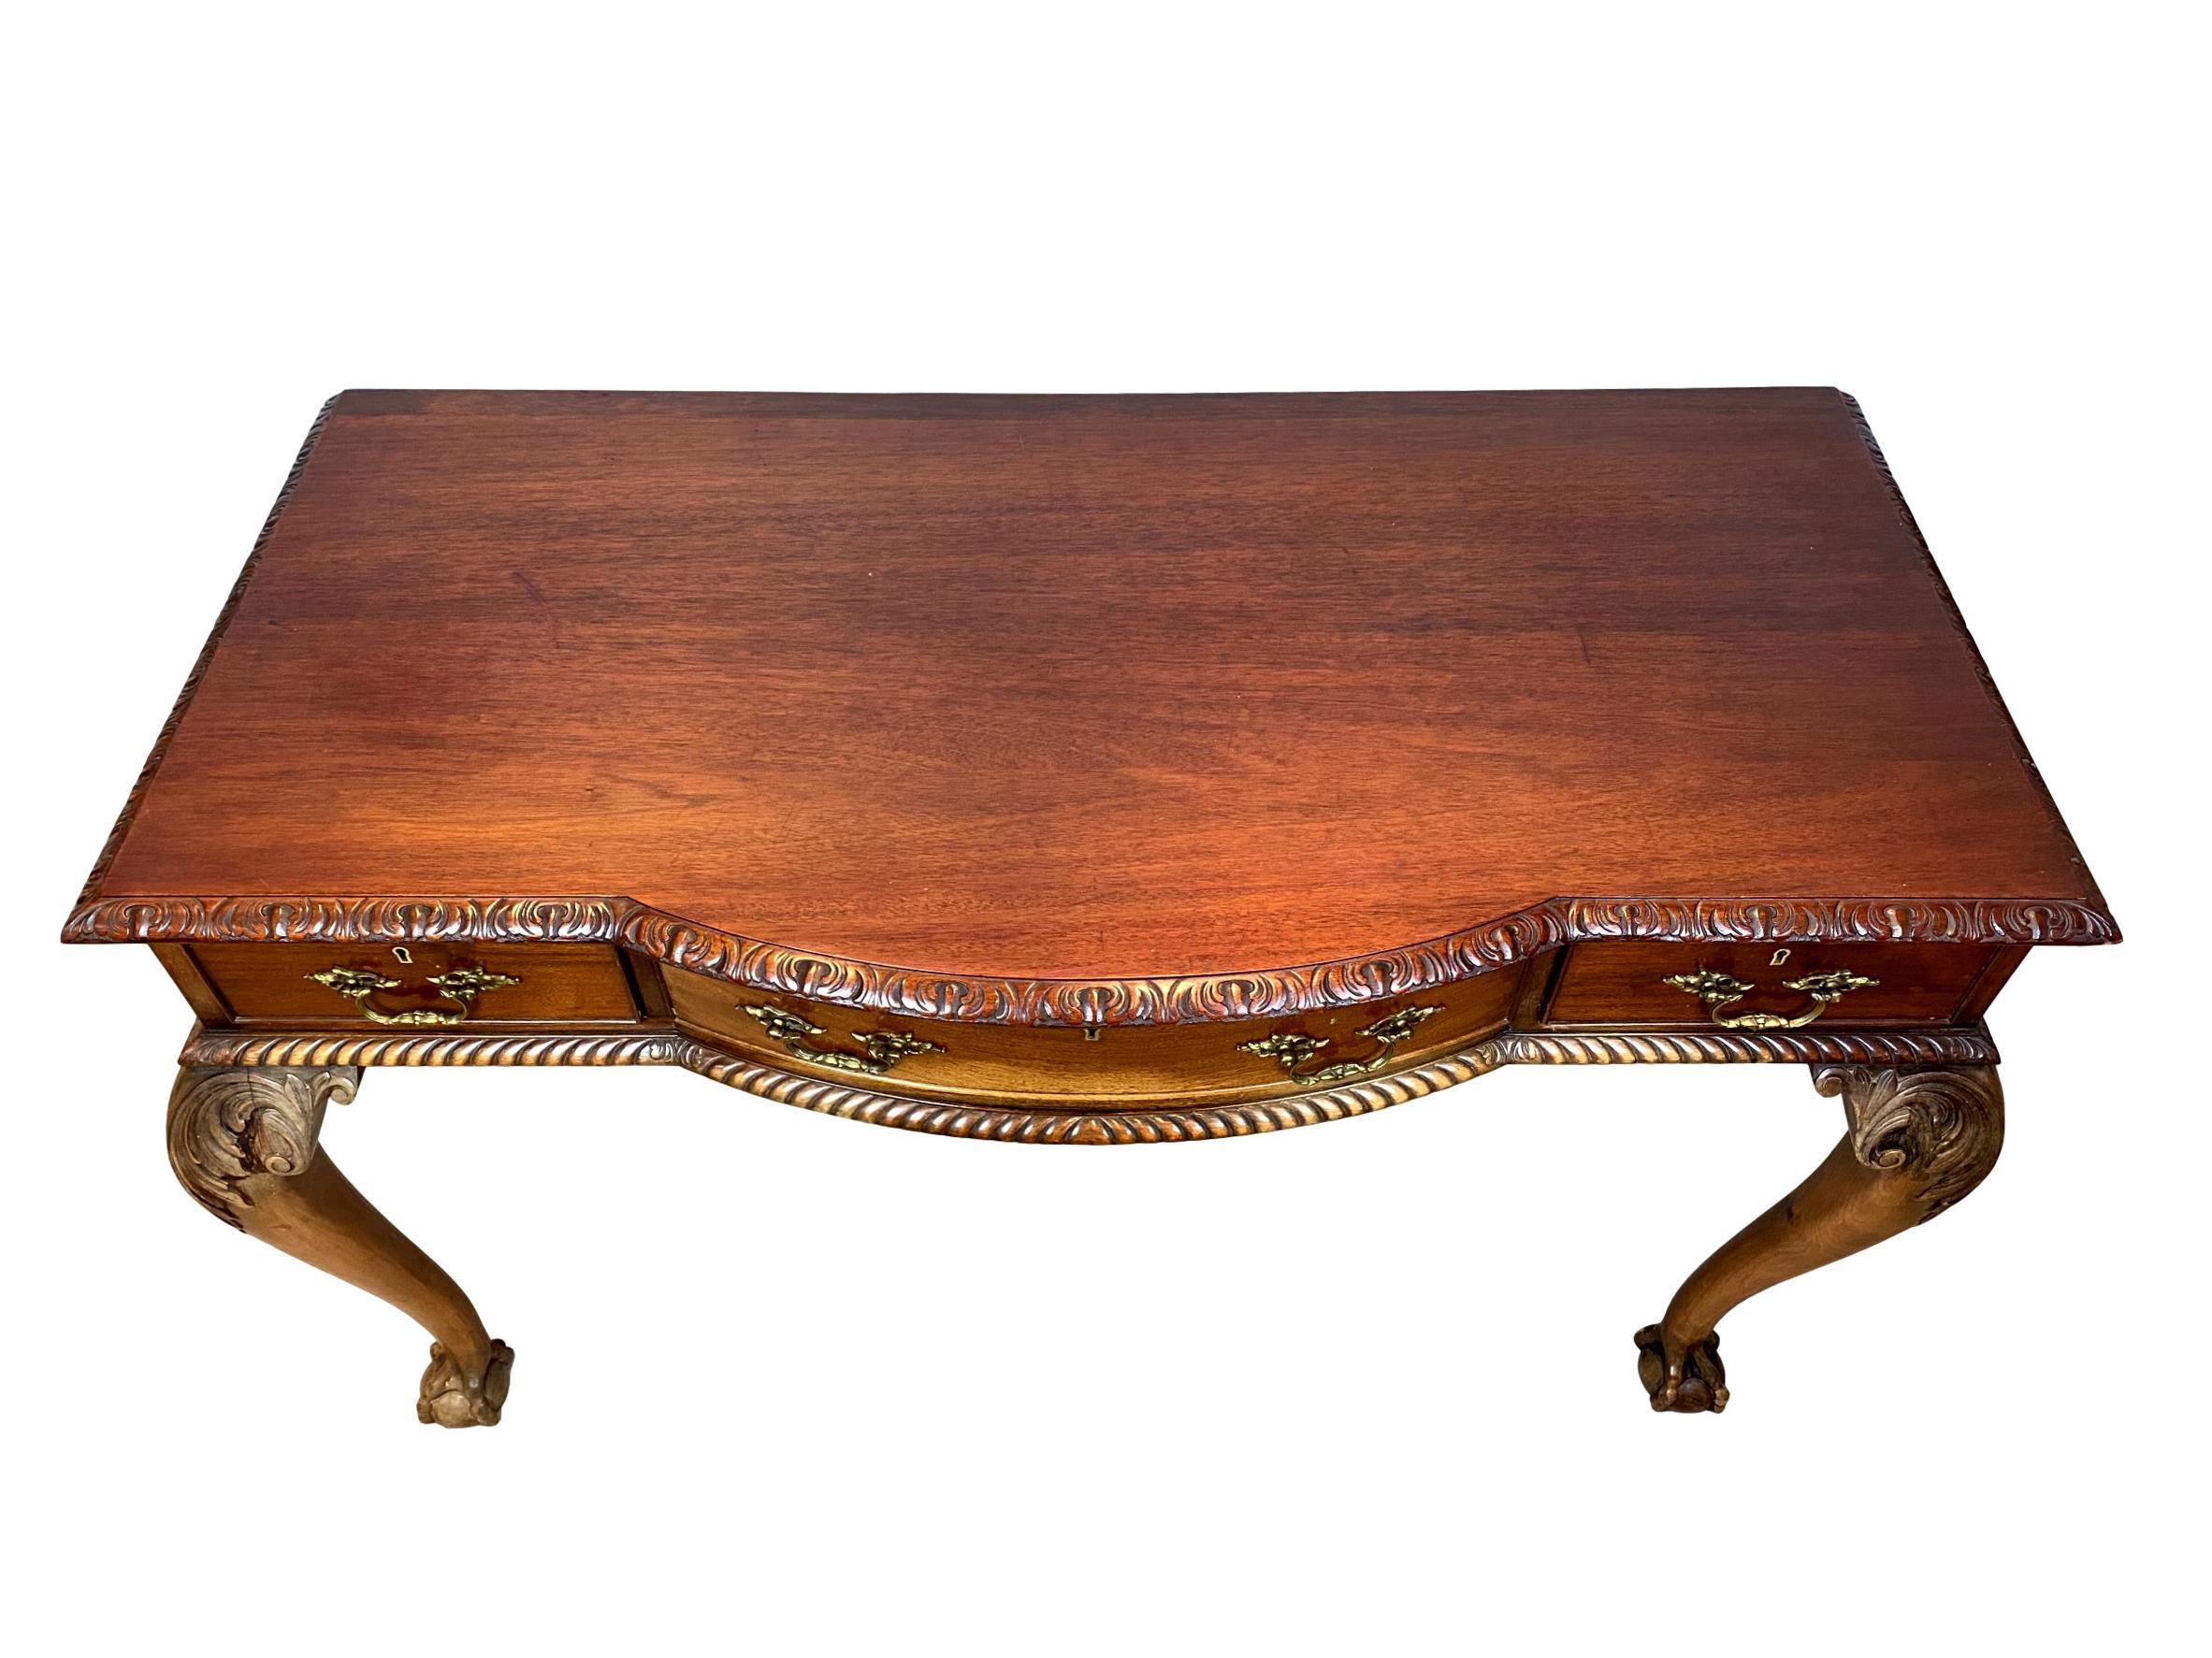 Hand-Crafted Chippendale Revival Mahogany Three-Drawer Console Table, English, circa 1880 For Sale